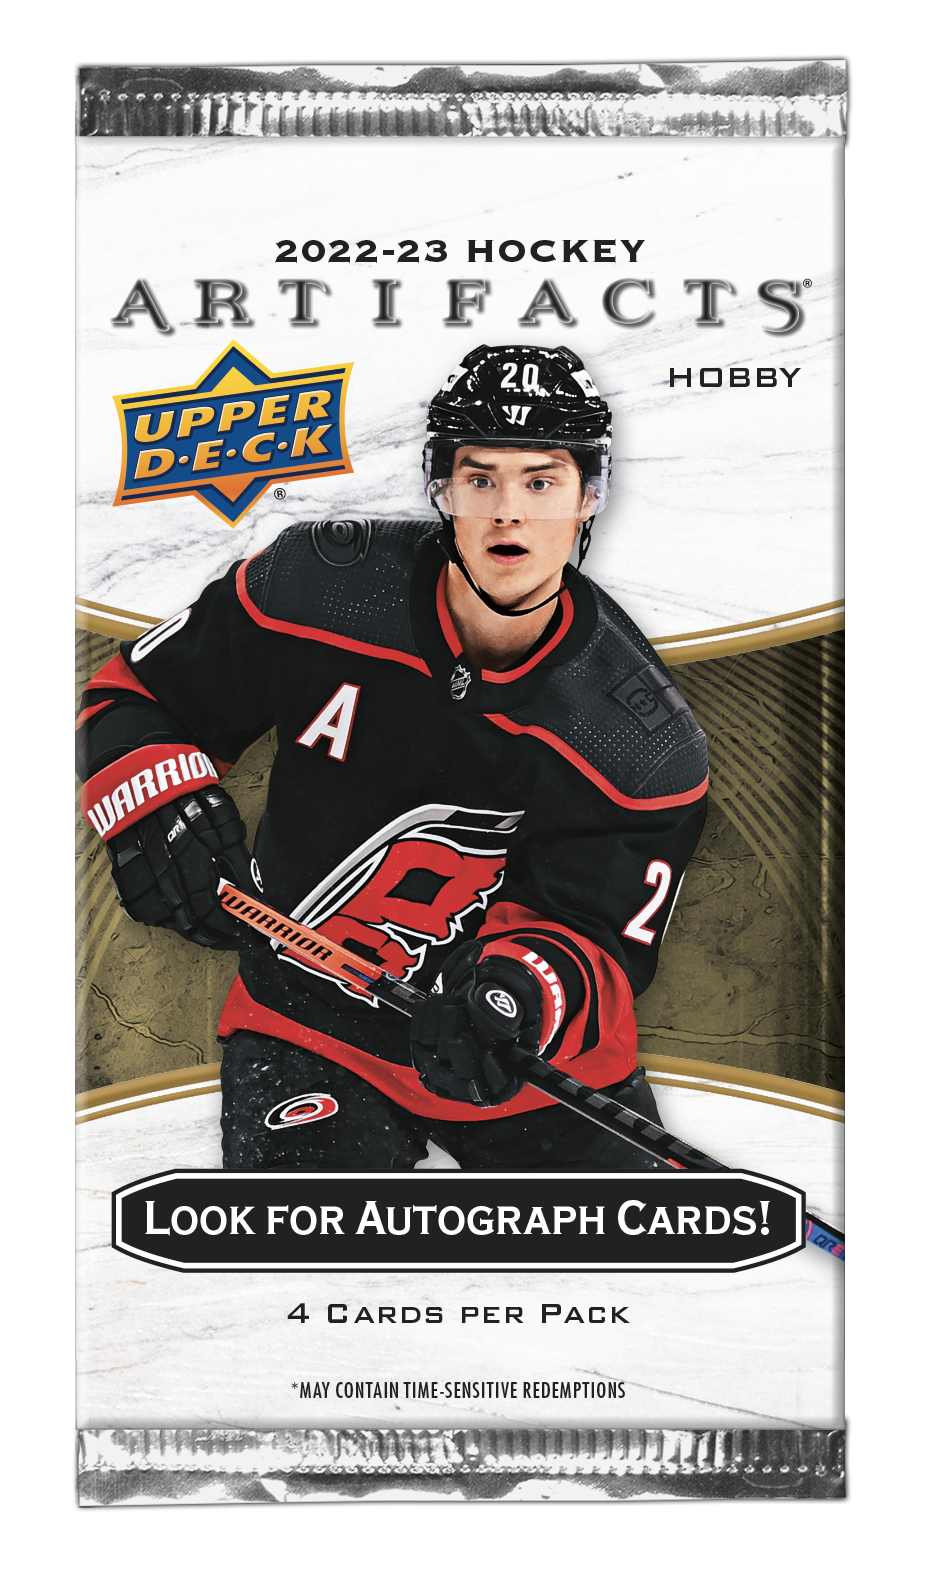 2022-23 Upper Deck Artifacts Hockey Hobby Box Master Case (Case of 20 Boxes) (Pre-Order) Coming Soon - Miraj Trading